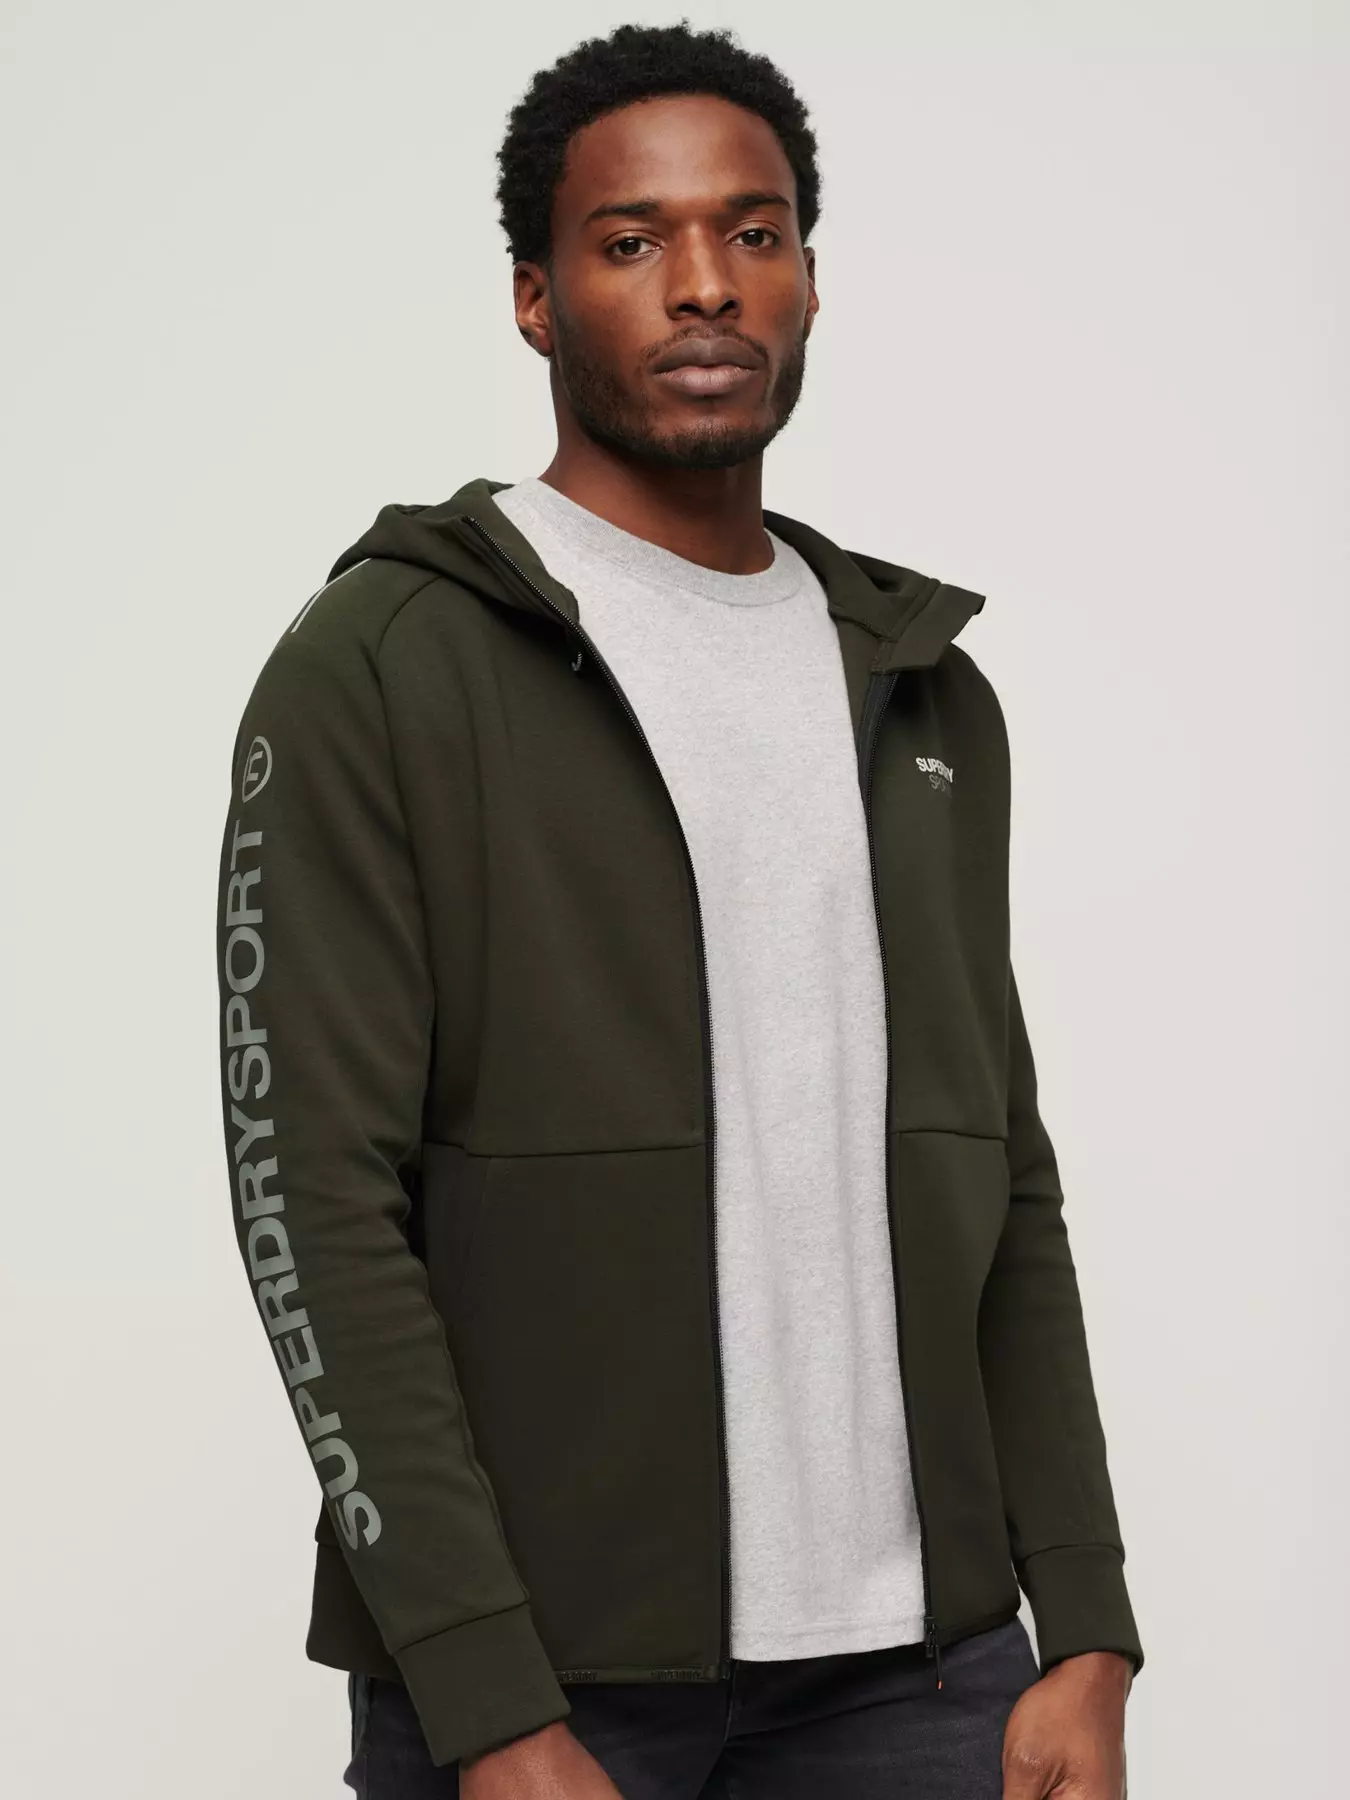 Superdry Sport hooded sweat in gray